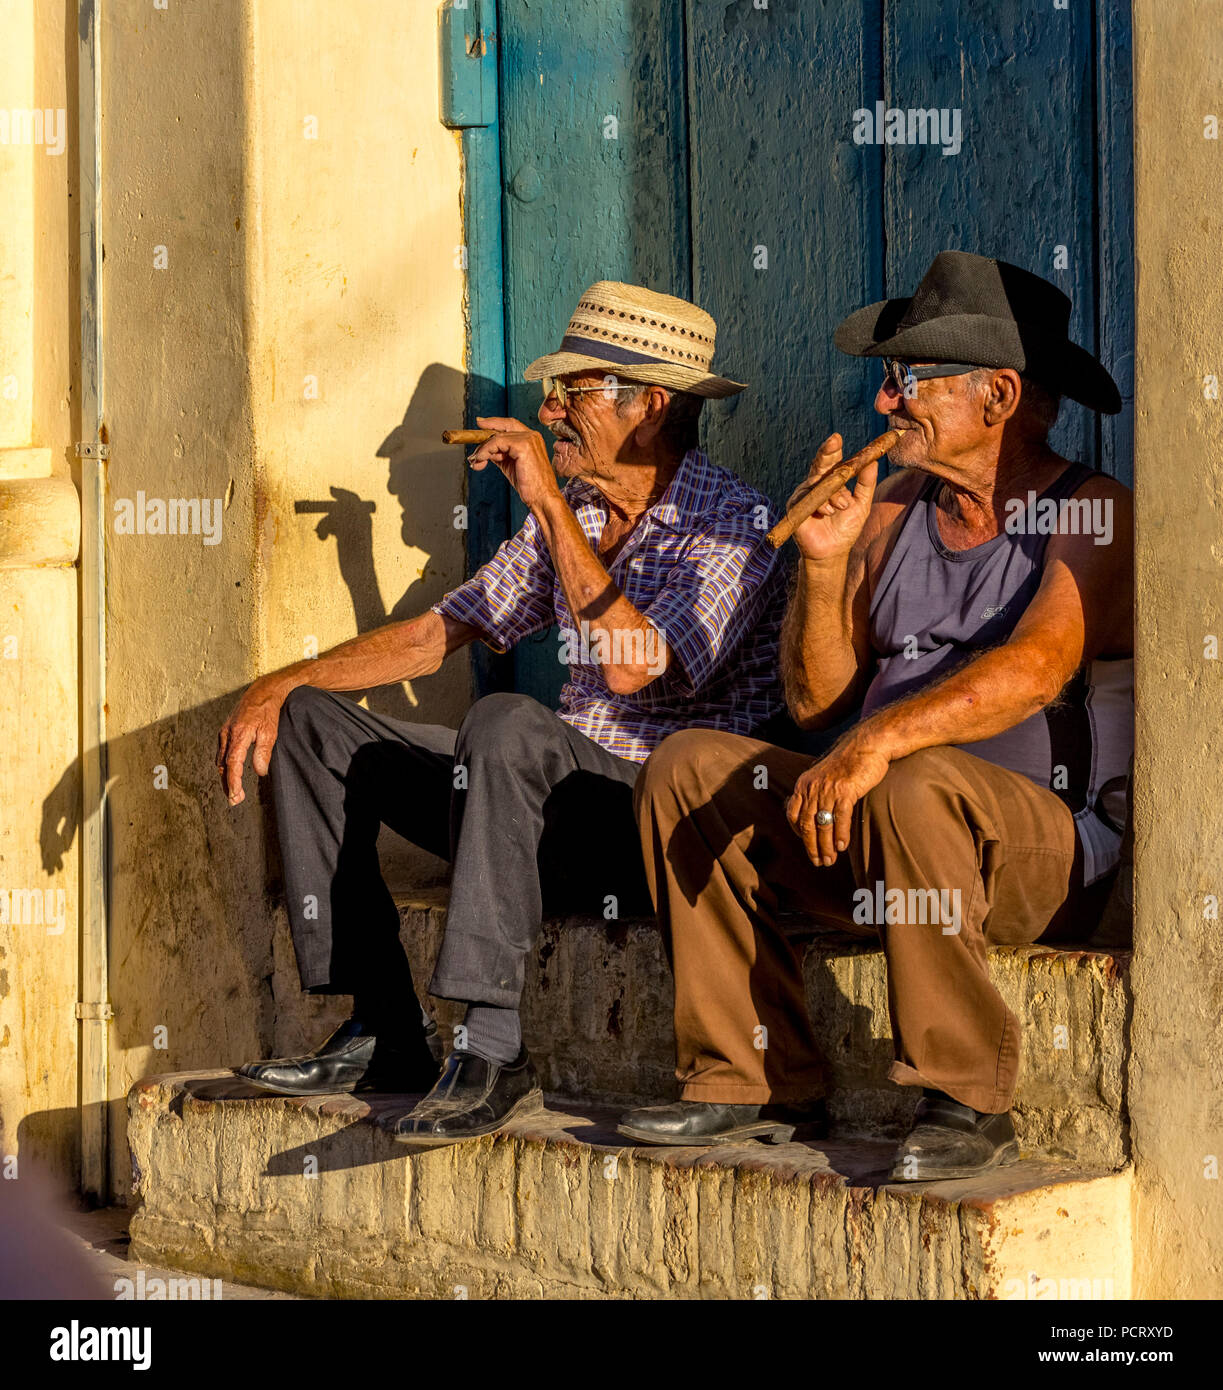 Two old Cubans smoke cigars and sit on a staircase in the warm light of the sunset, Trinidad, Cuba, Sancti Spíritus, Cuba Stock Photo